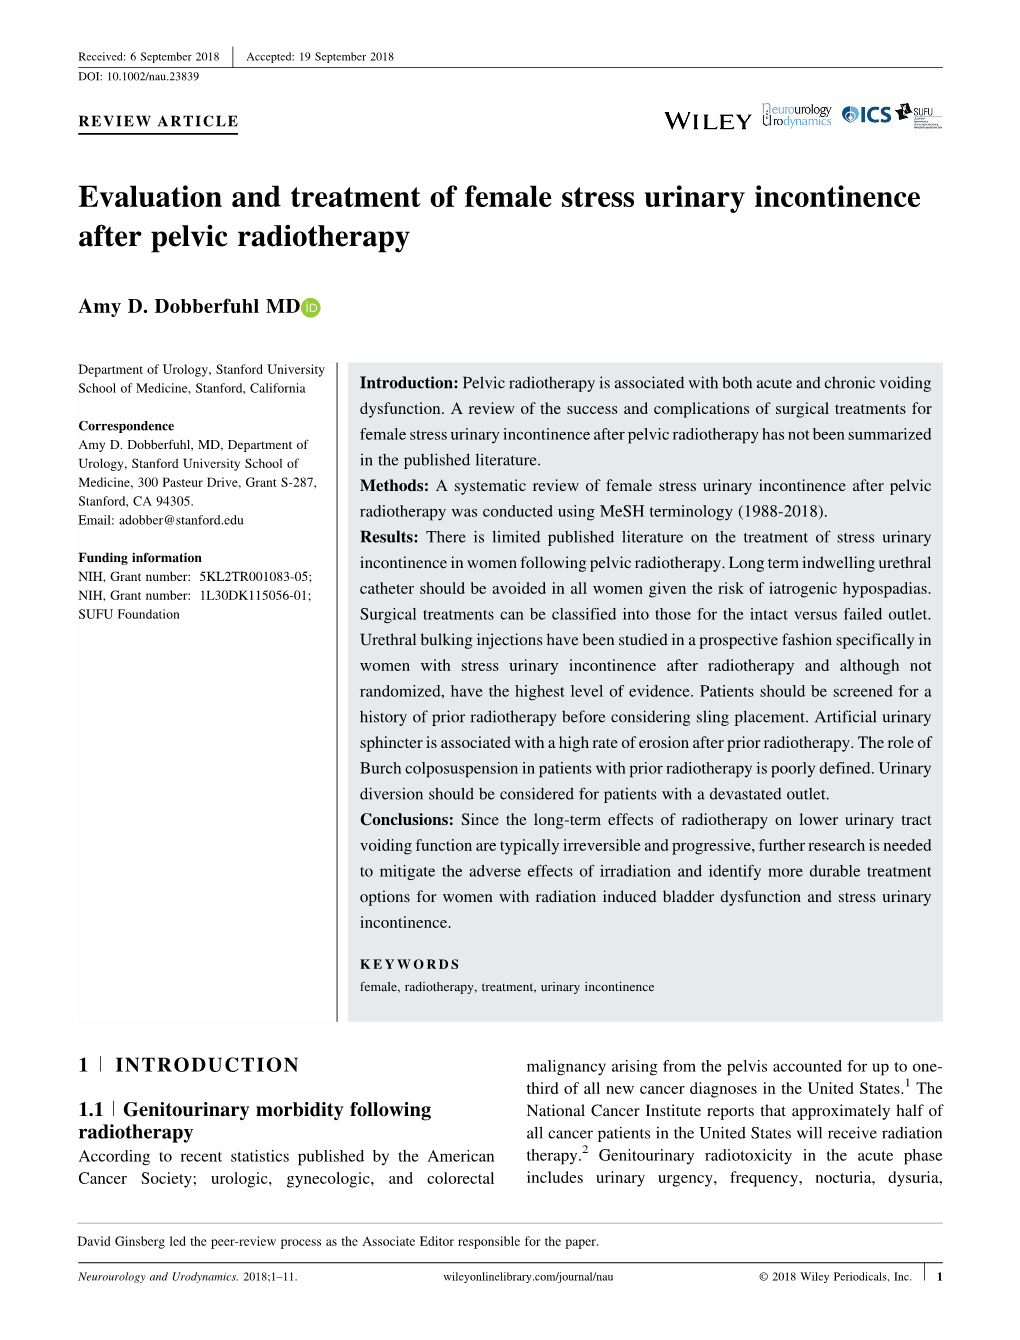 Evaluation and Treatment of Female Stress Urinary Incontinence After Pelvic Radiotherapy